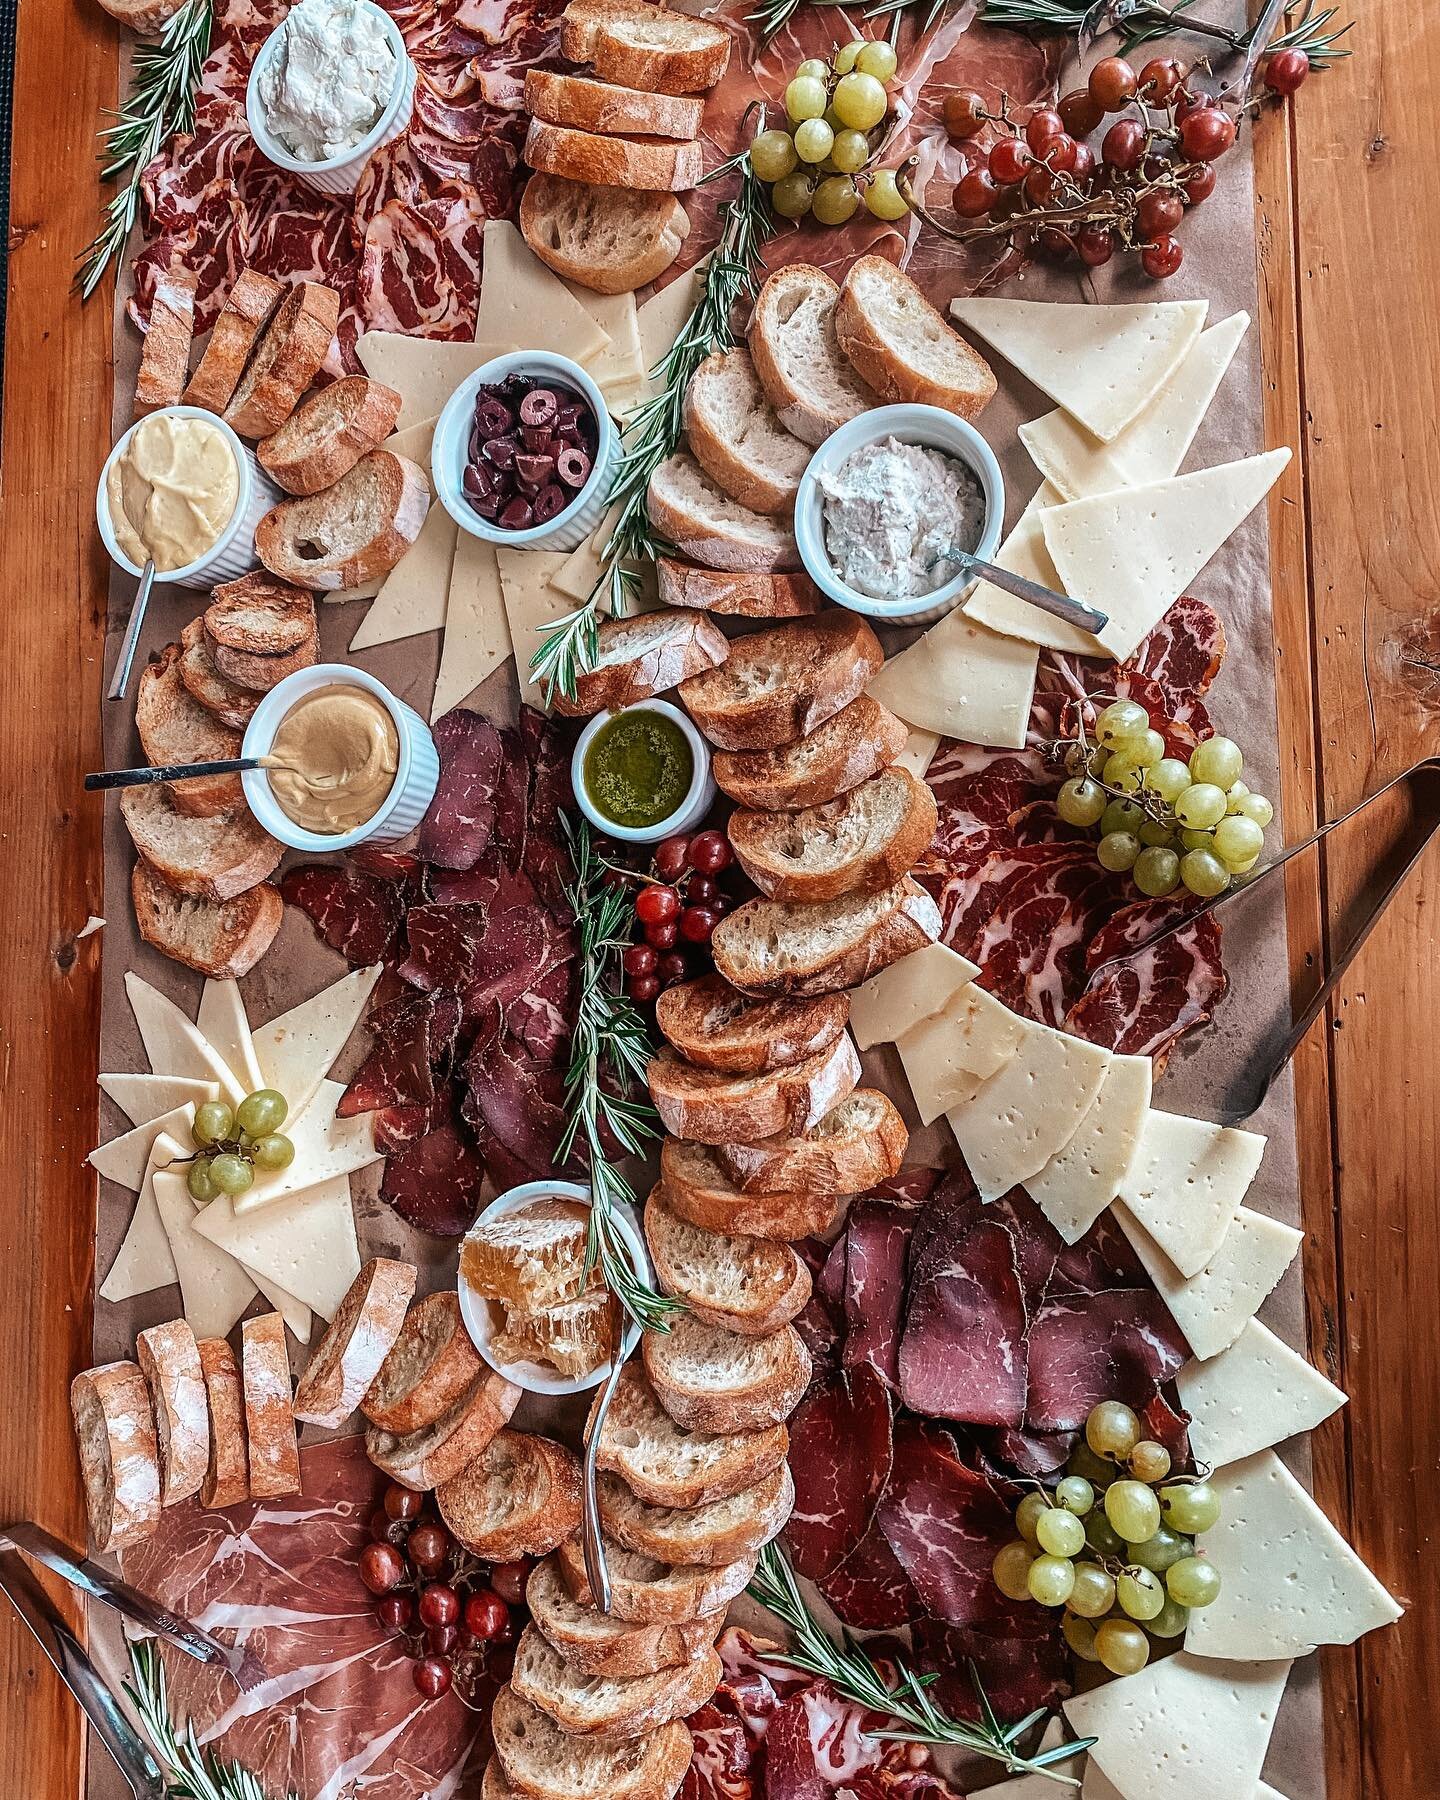 All of the charcuterie a wedding guest can ask for 🧀🥖

 #chicagowedding #ChicagoWeddings #chicagoweddingplanner #chicagoweddingphotography #chicagoweddingvenue #chicagoweddingvendors #chicagoweddingflorist #ChicagoWeddingAndEventPlanner #chicagowed